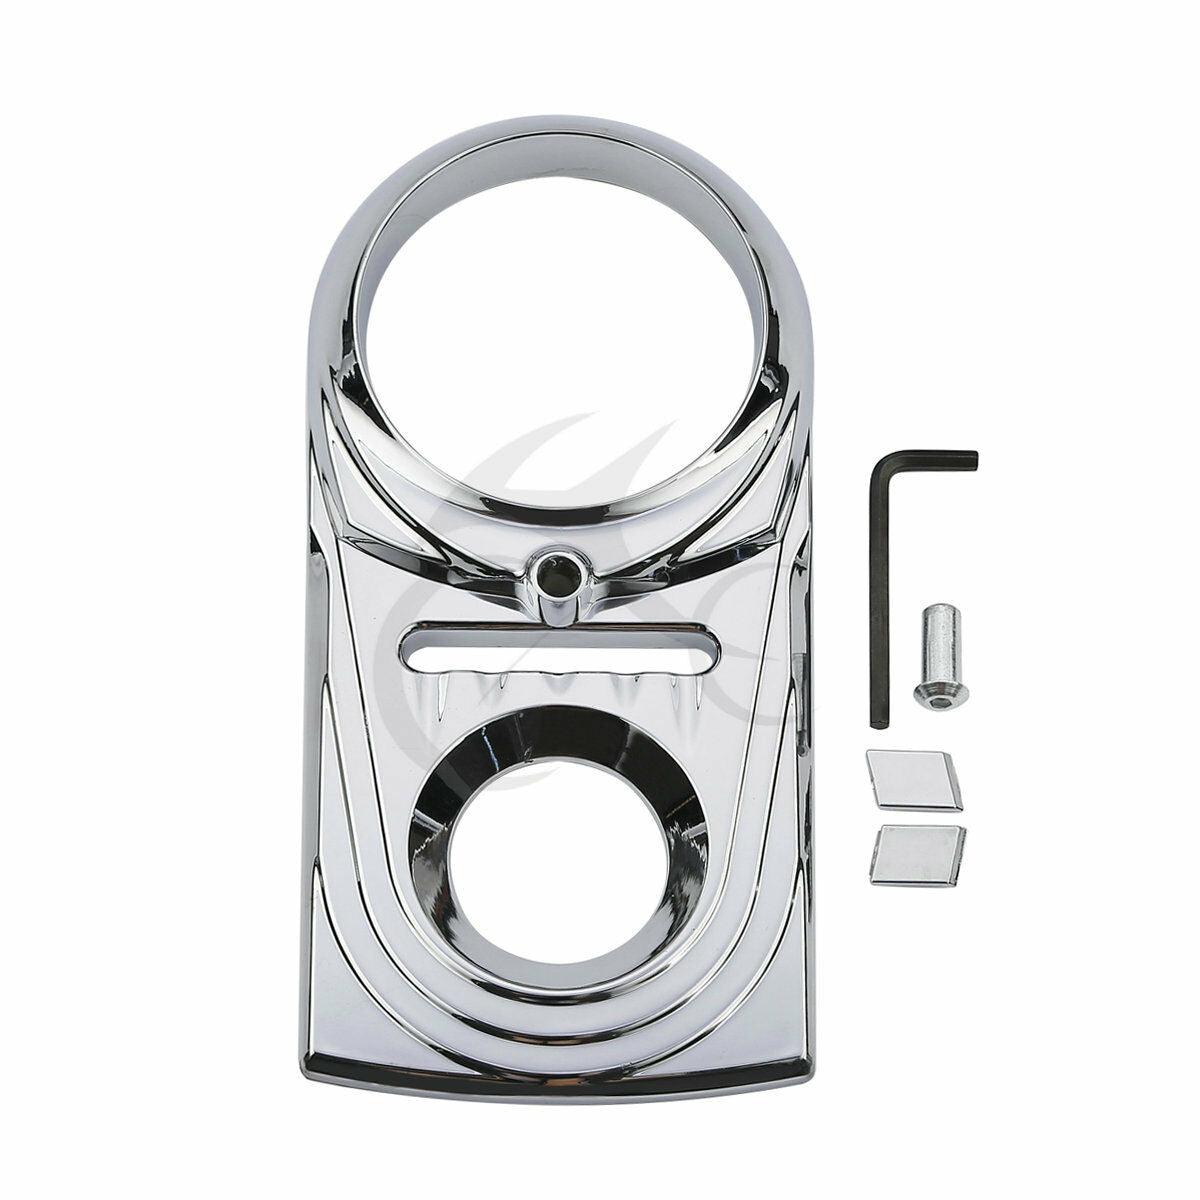 New Chrome Dash Panel Insert Cover For Harley Softail Deluxe Fat Boy Dyna FXDWG - Moto Life Products